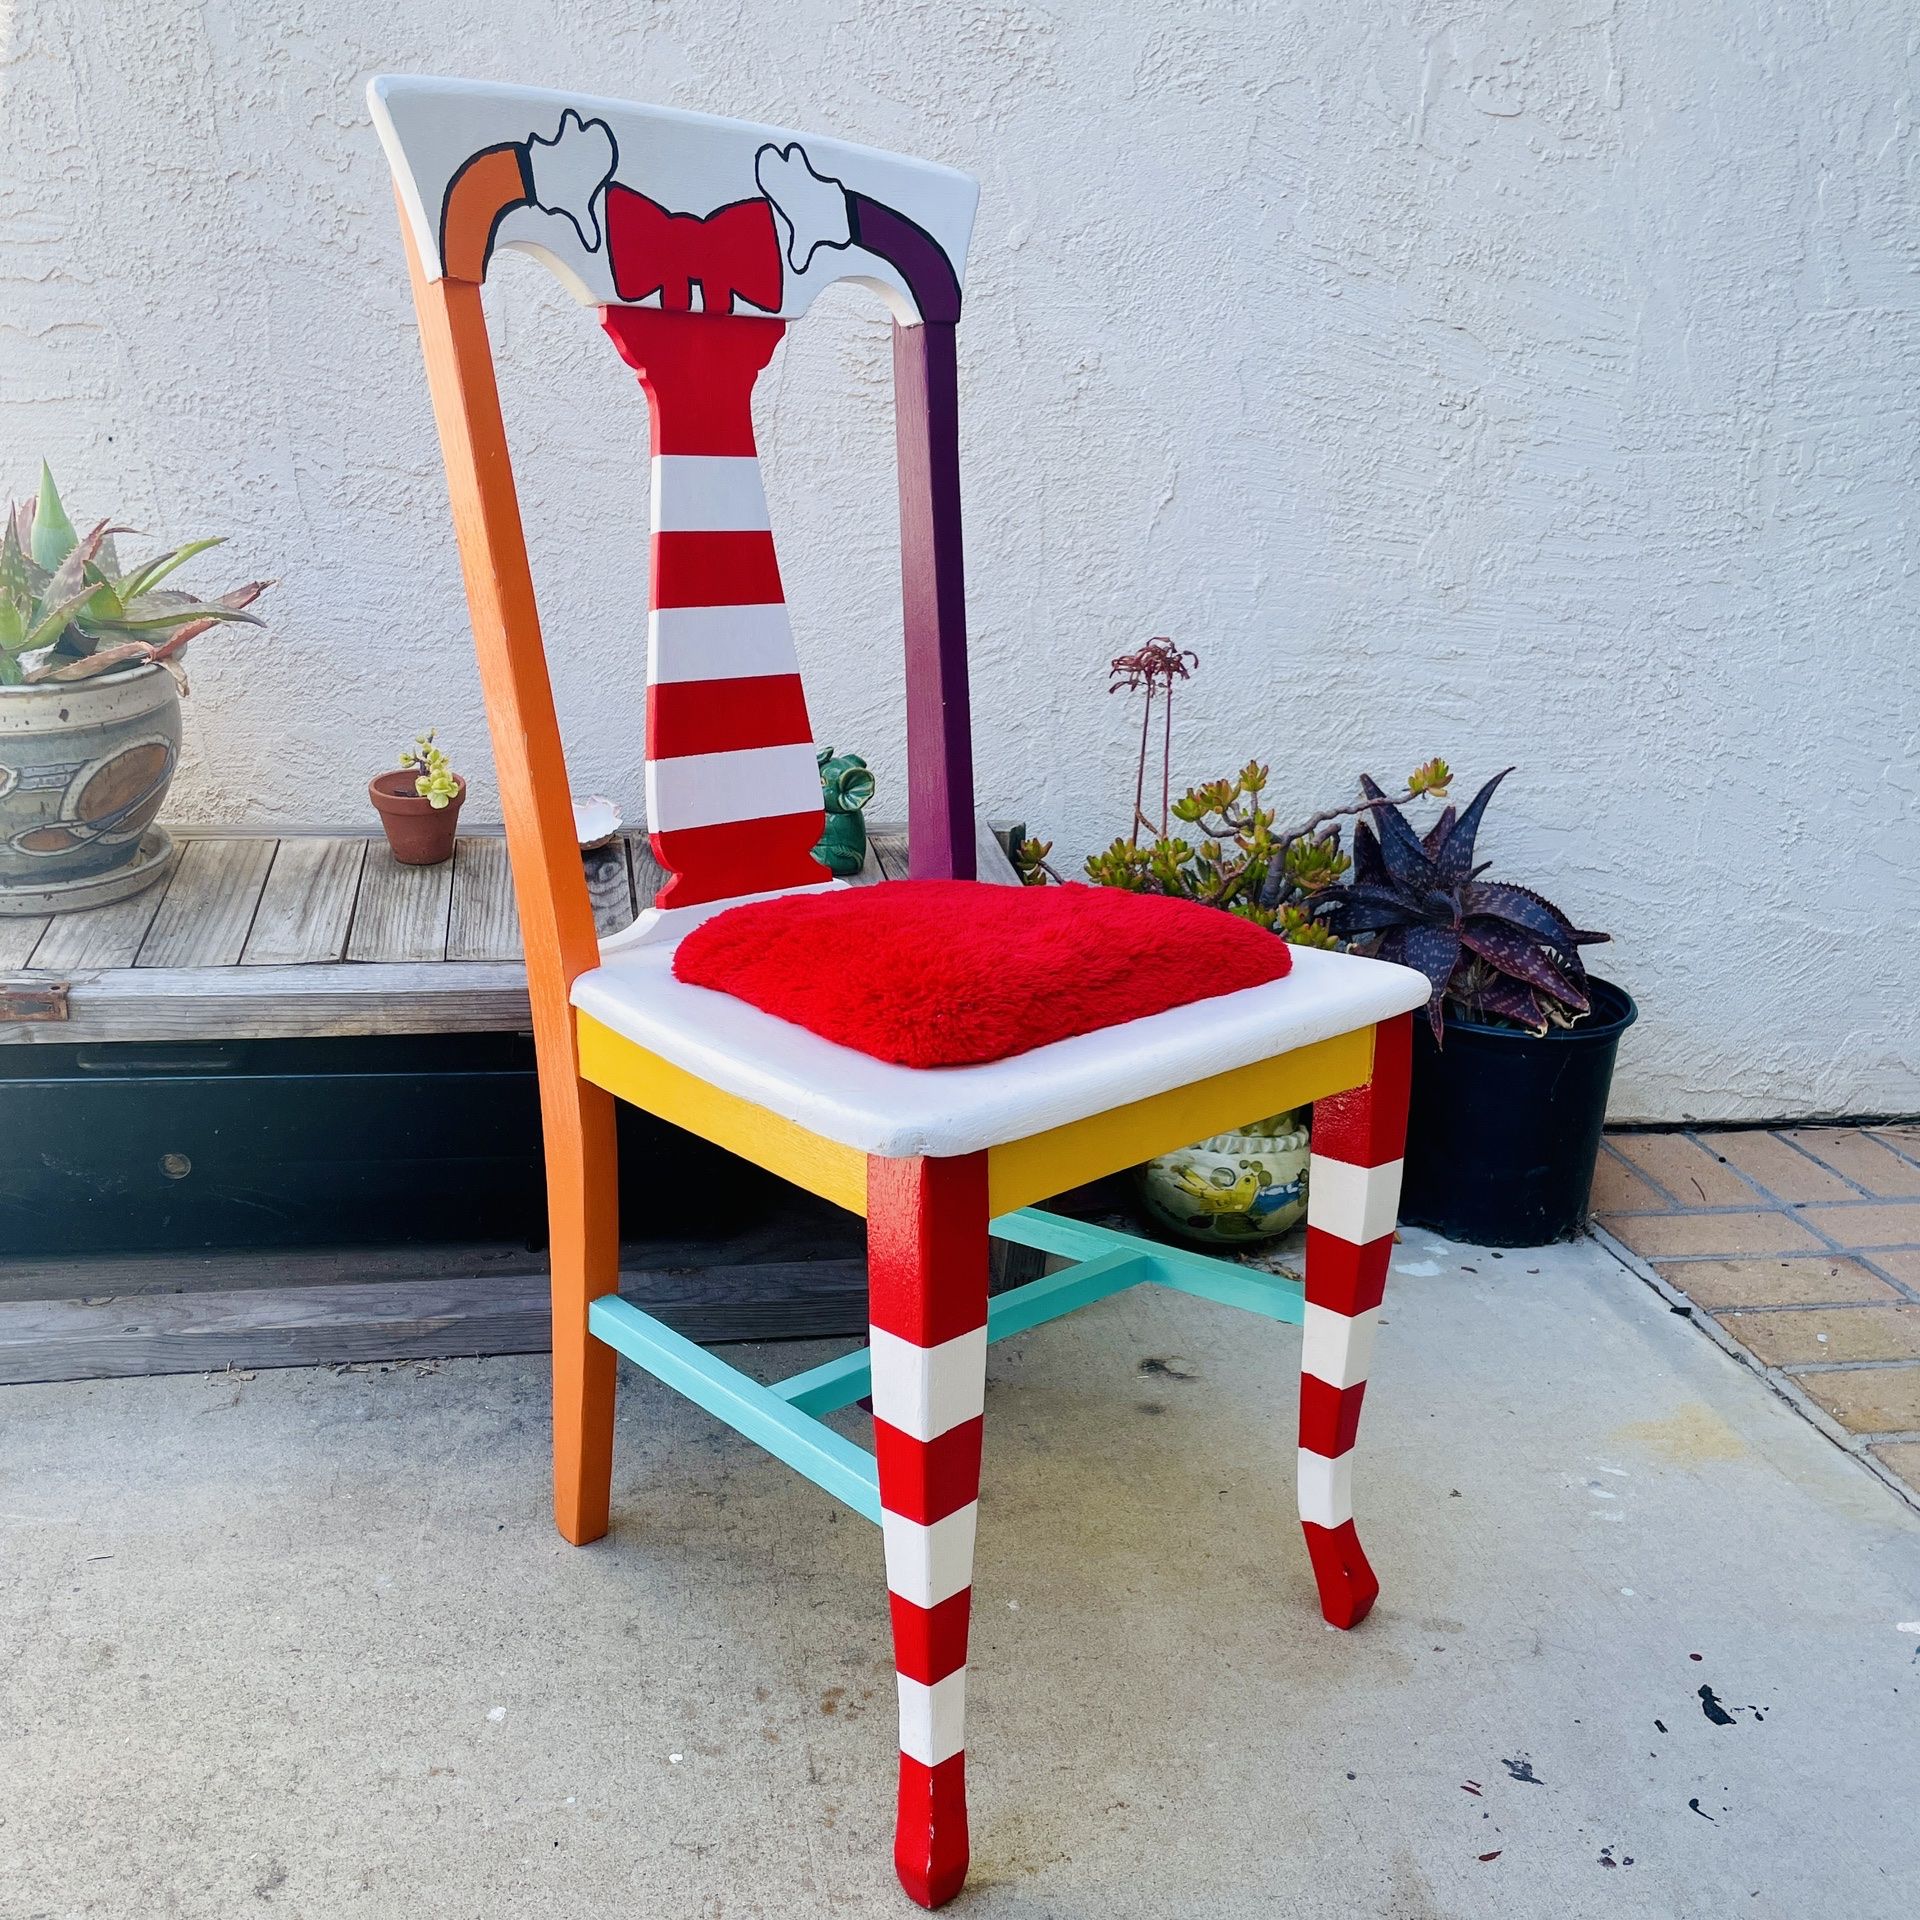 HAND PAINTED CUSTOM MADE “SEUSS” FULL SIZE UNIQUE CHAIR